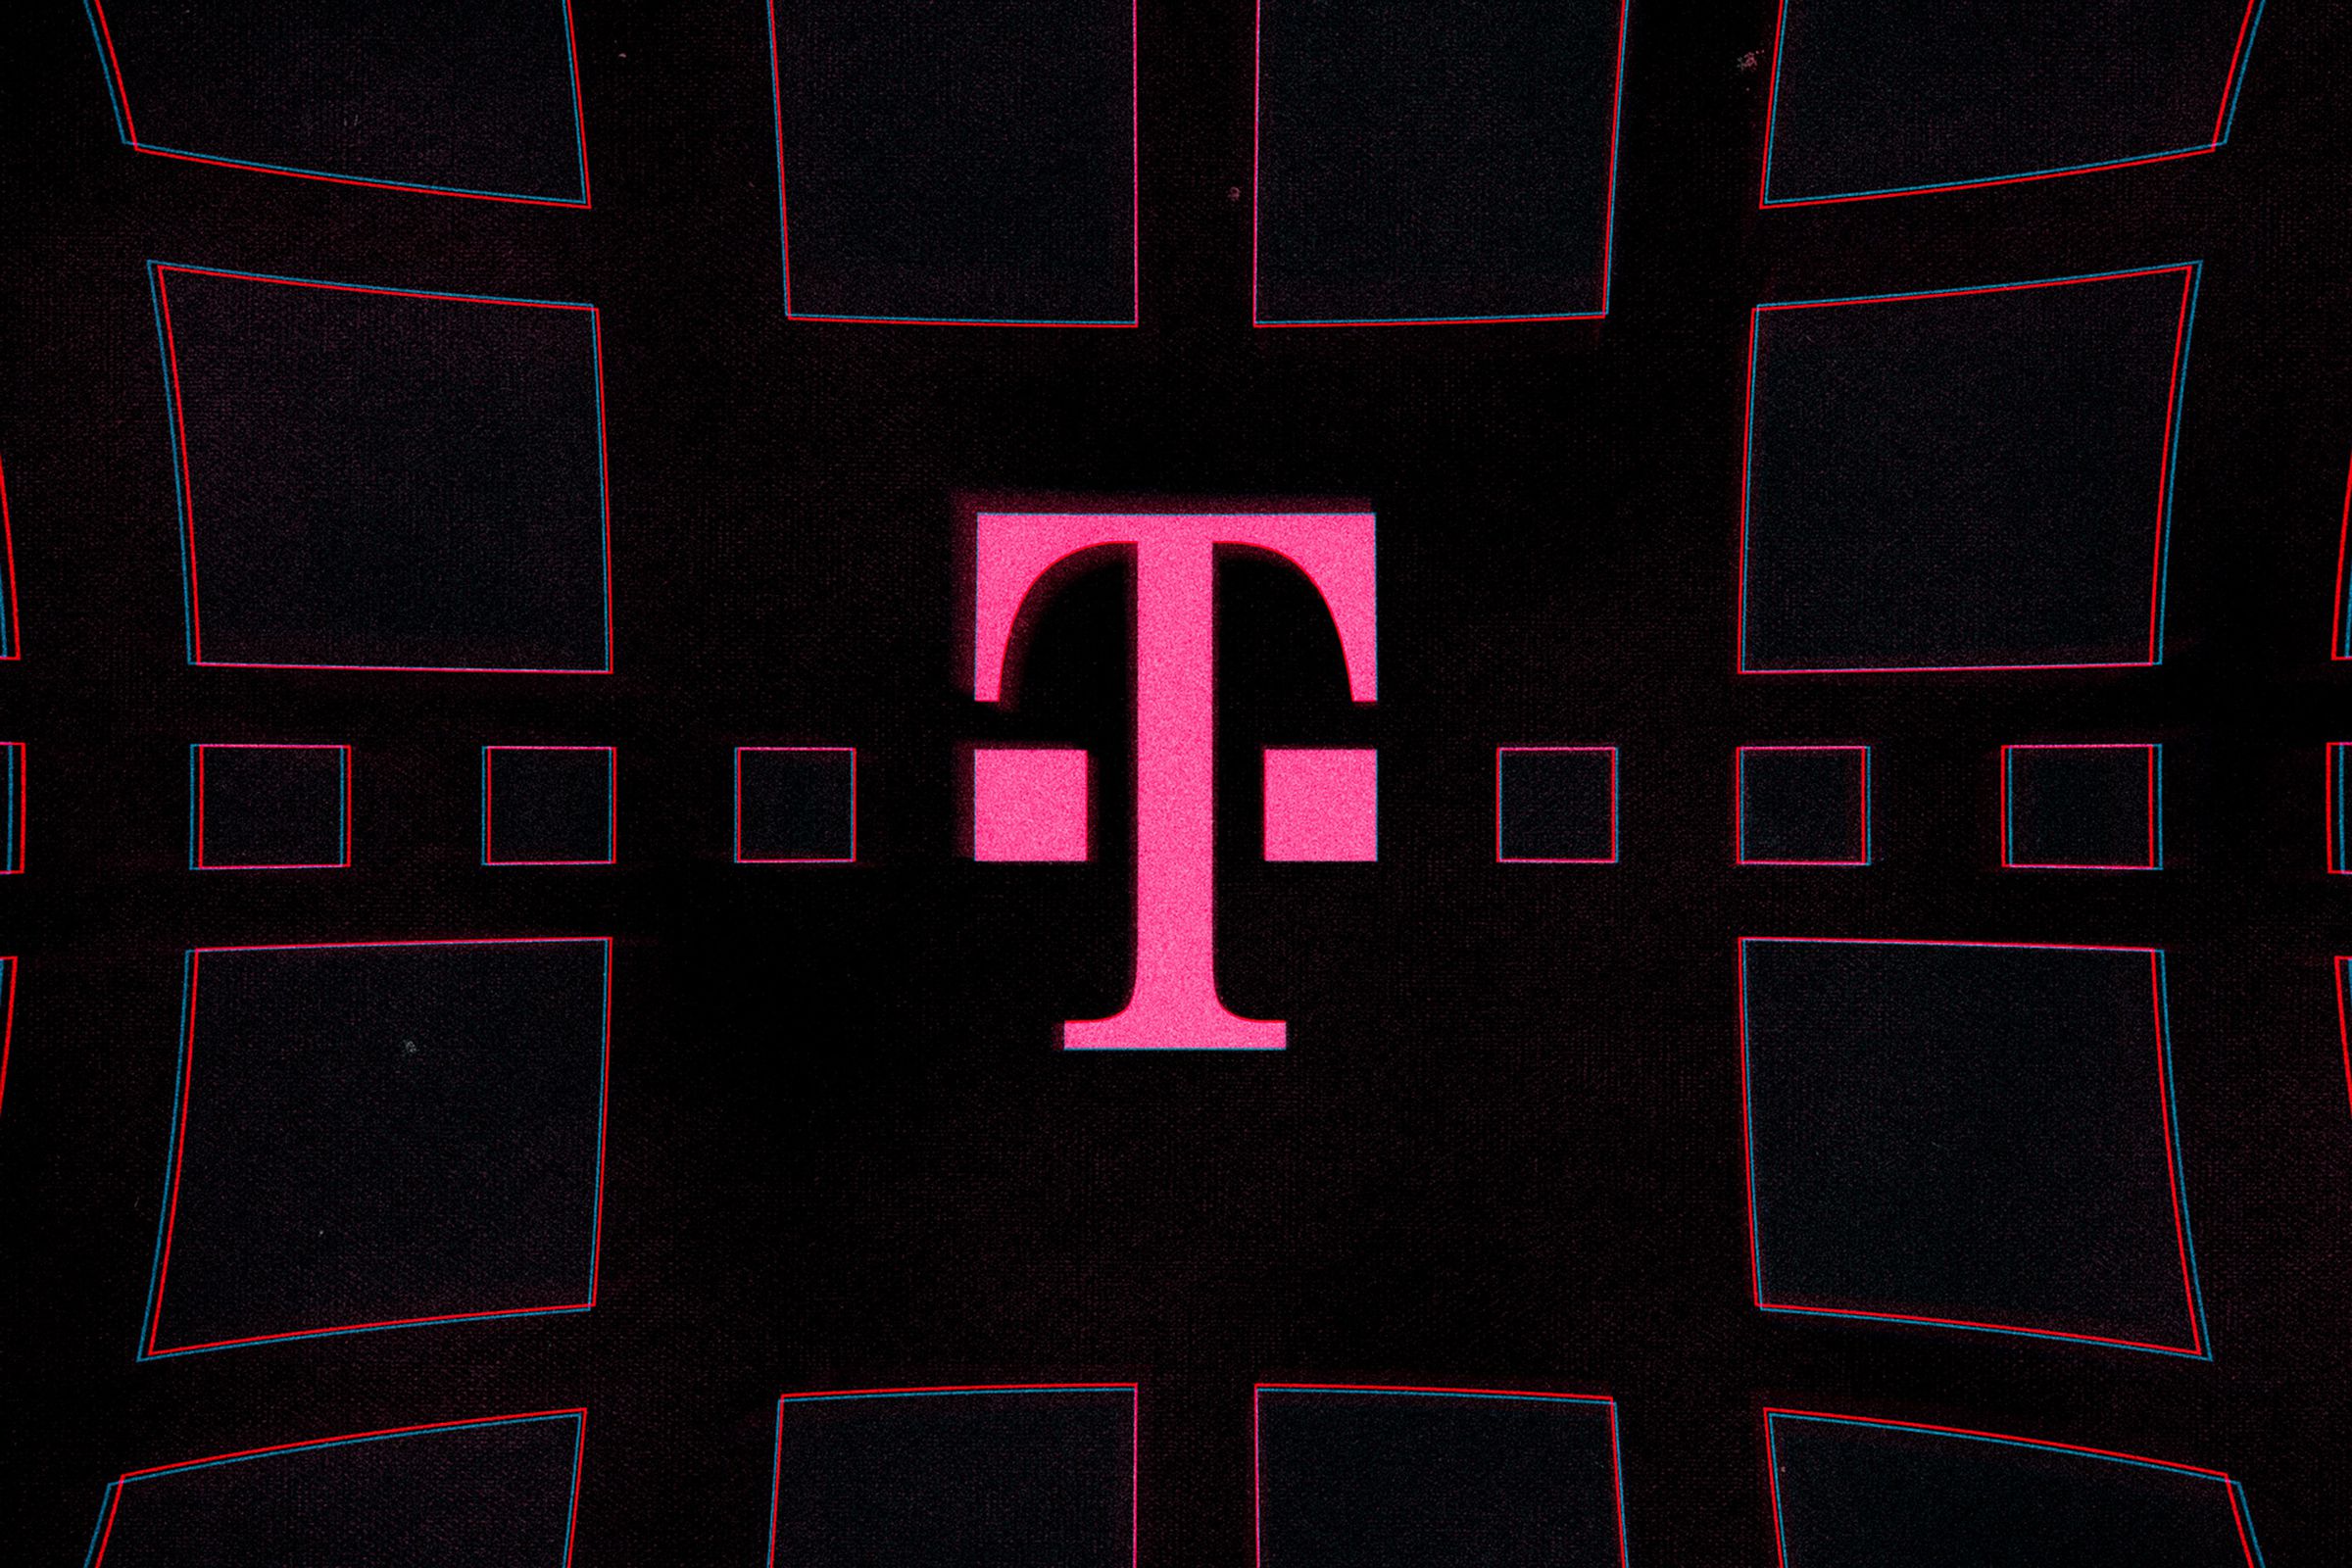 An illustration of T-Mobile’s magenta “T” logo on a black field with color-matched graphical squares.